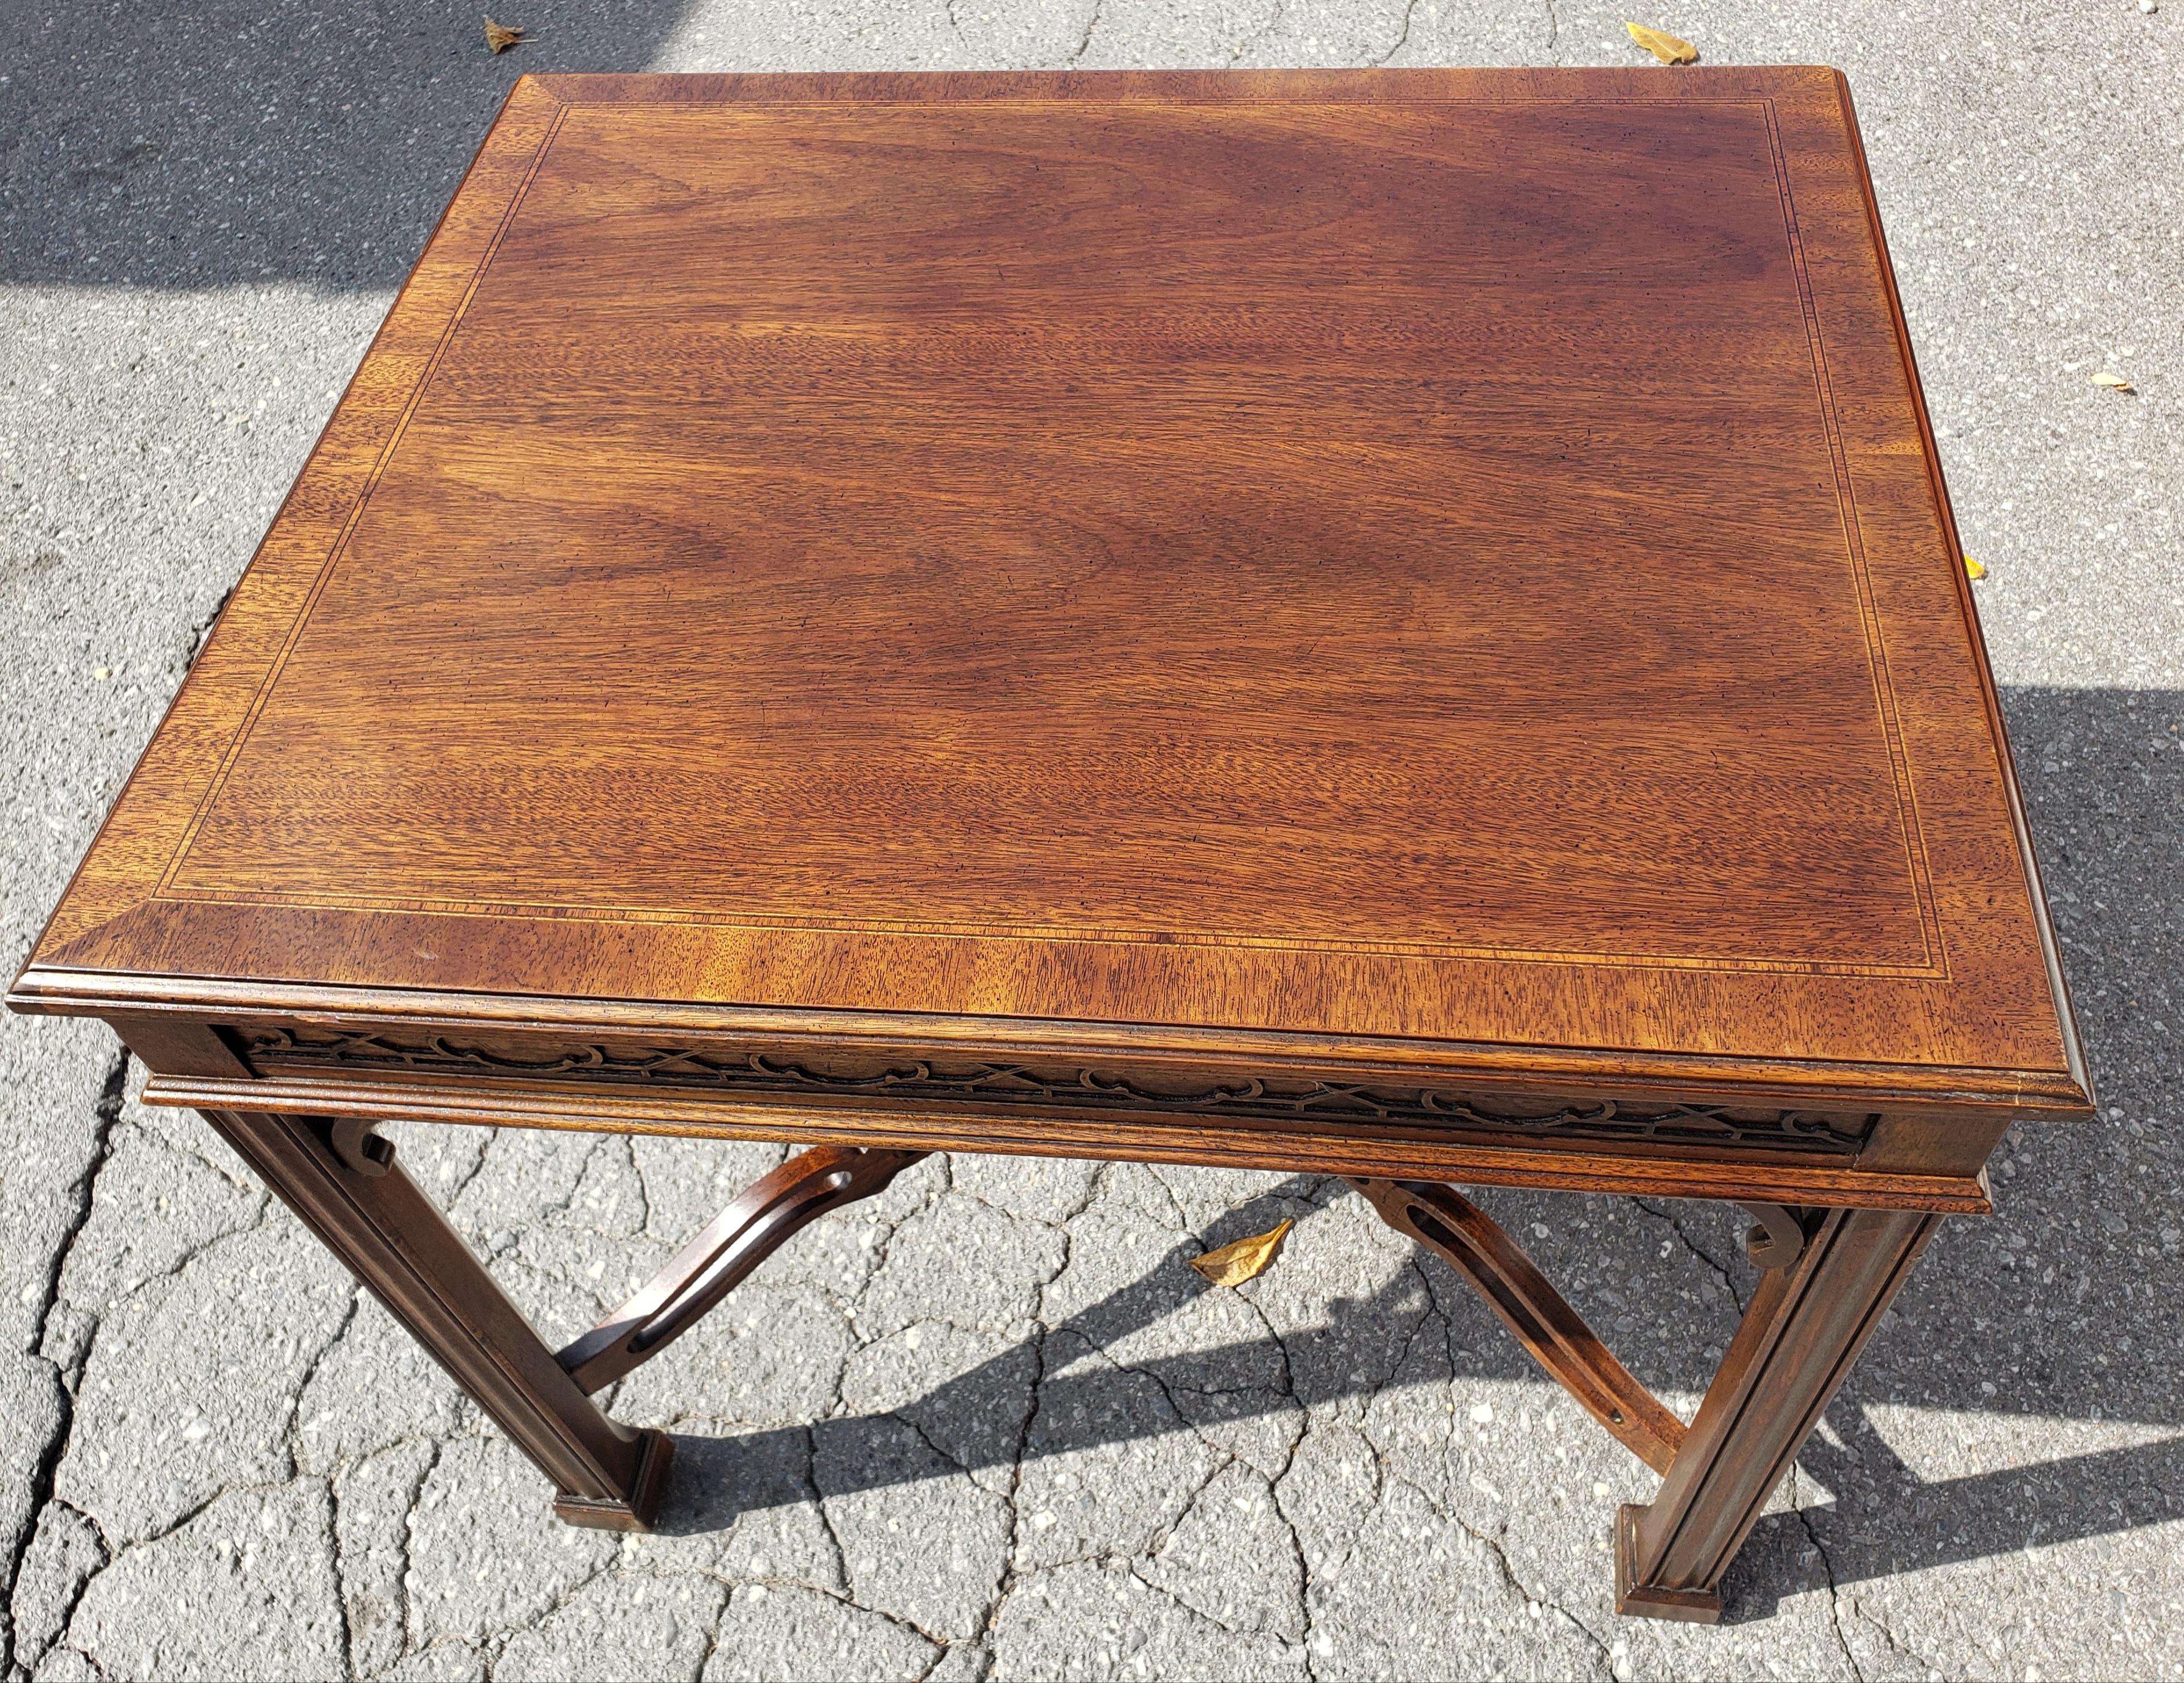 1980s Drexel Heritage Chippendale Walnut Accent Table W/ Fretwork and Banded Top For Sale 1